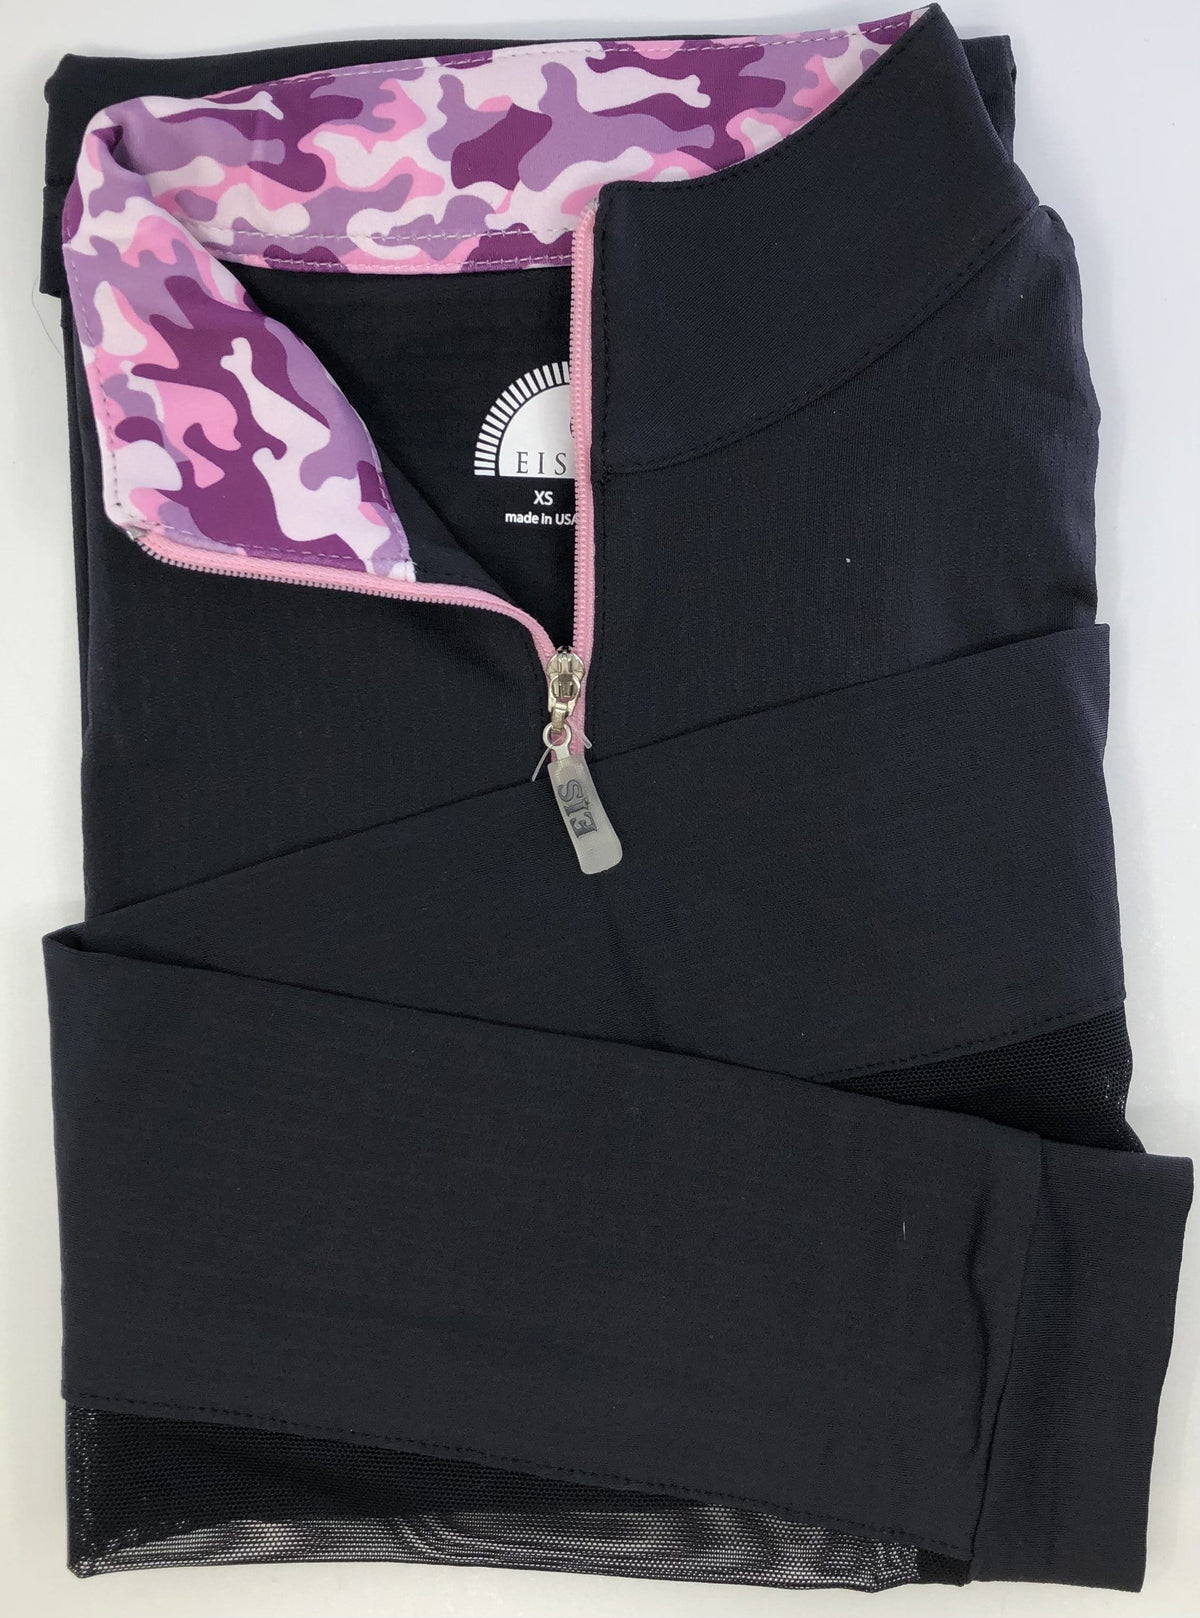 EIS Custom Team Shirts Black/Pink Camo EIS- Sunshirts (S) equestrian team apparel online tack store mobile tack store custom farm apparel custom show stable clothing equestrian lifestyle horse show clothing riding clothes horses equestrian tack store